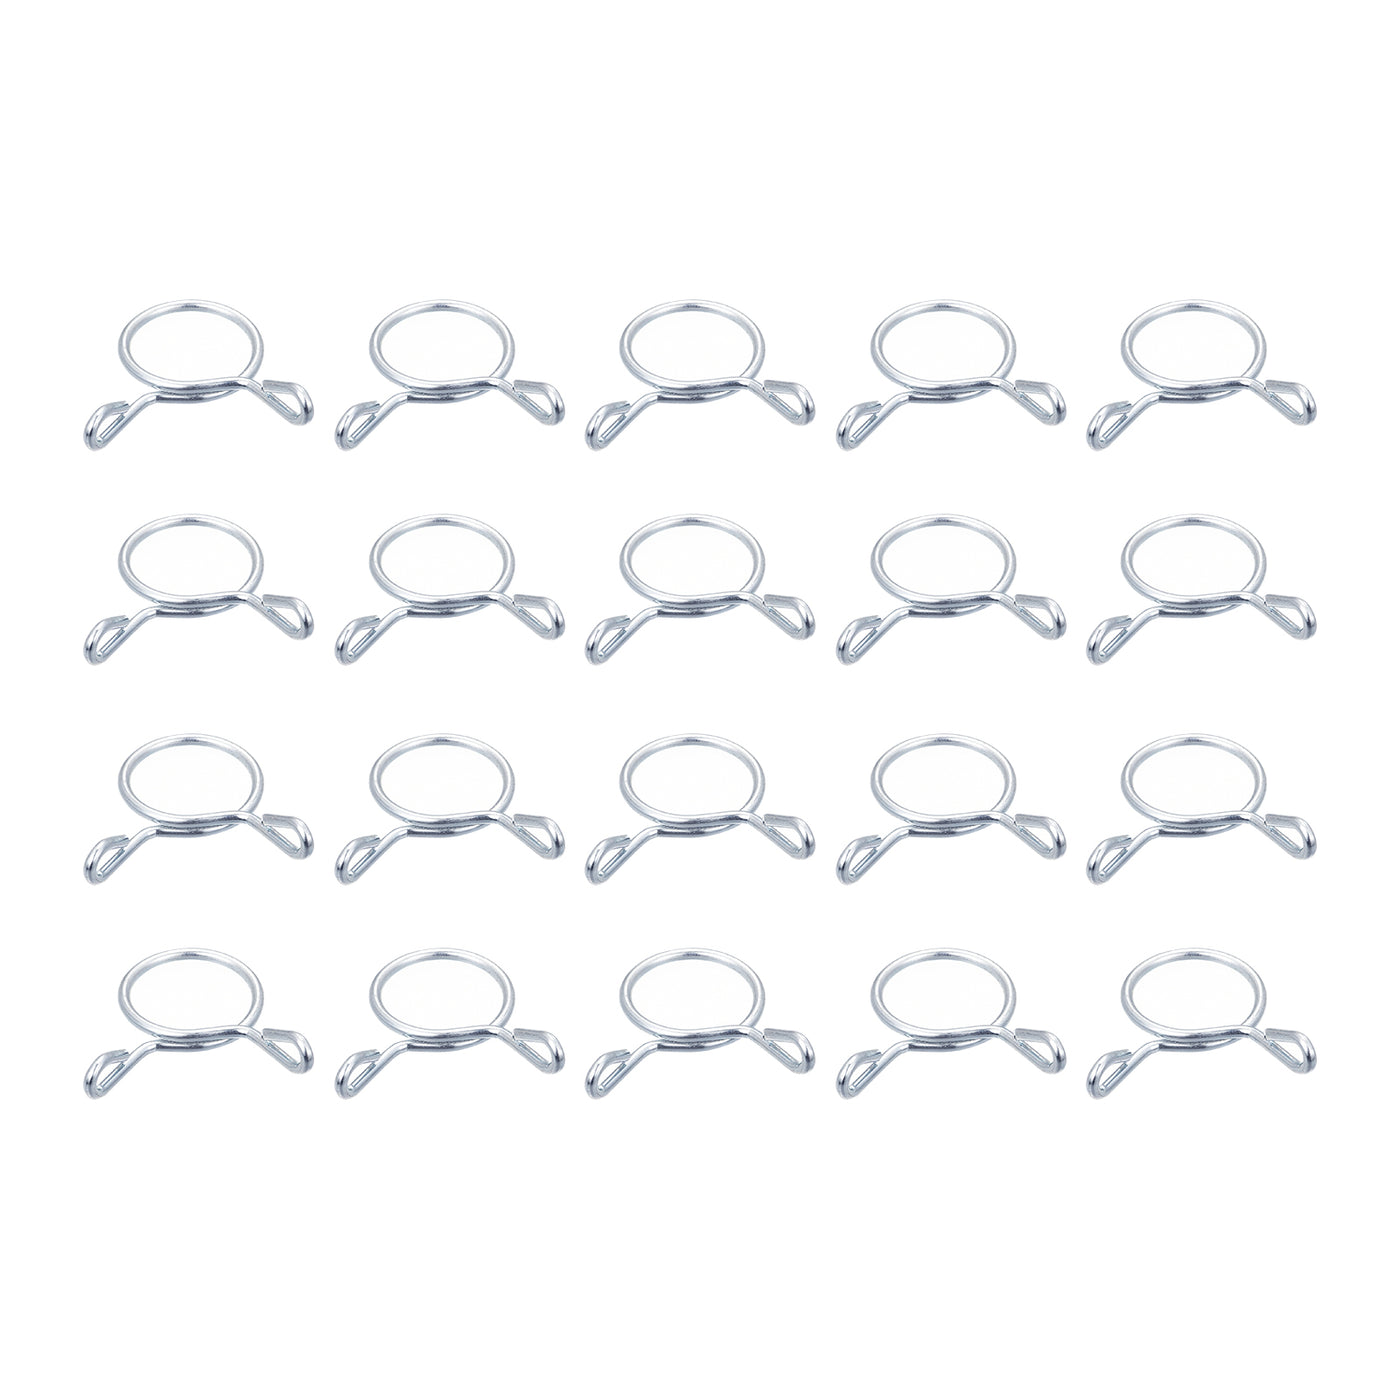 Uxcell Uxcell Fuel Line Hose Clips, 50pcs 13mm 65Mn Steel Tubing Spring Clamps (Silver)